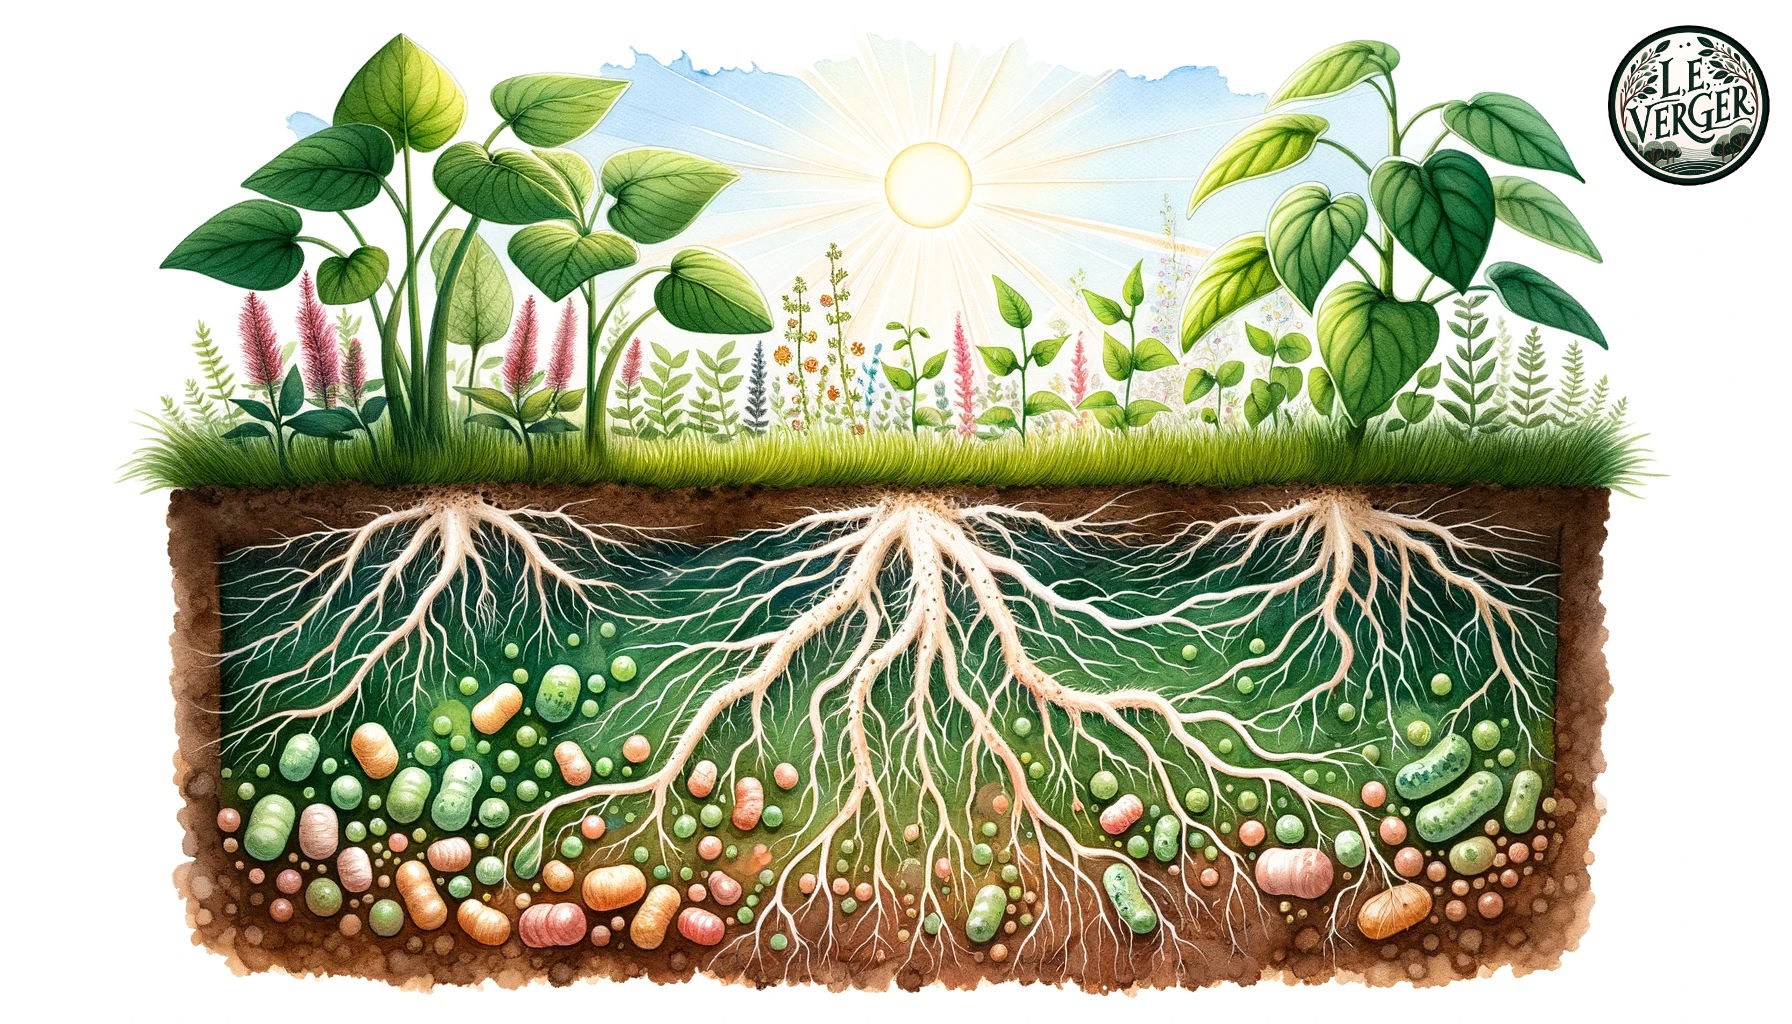 Watercolour Painting: A serene garden scene, with plants growing in abundance. Beneath the surface, there's a detailed depiction of the soil food web, with beneficial microorganisms interacting with roots and releasing nutrients. The sun shines above, symbolising the growth and vitality derived from healthy soil.